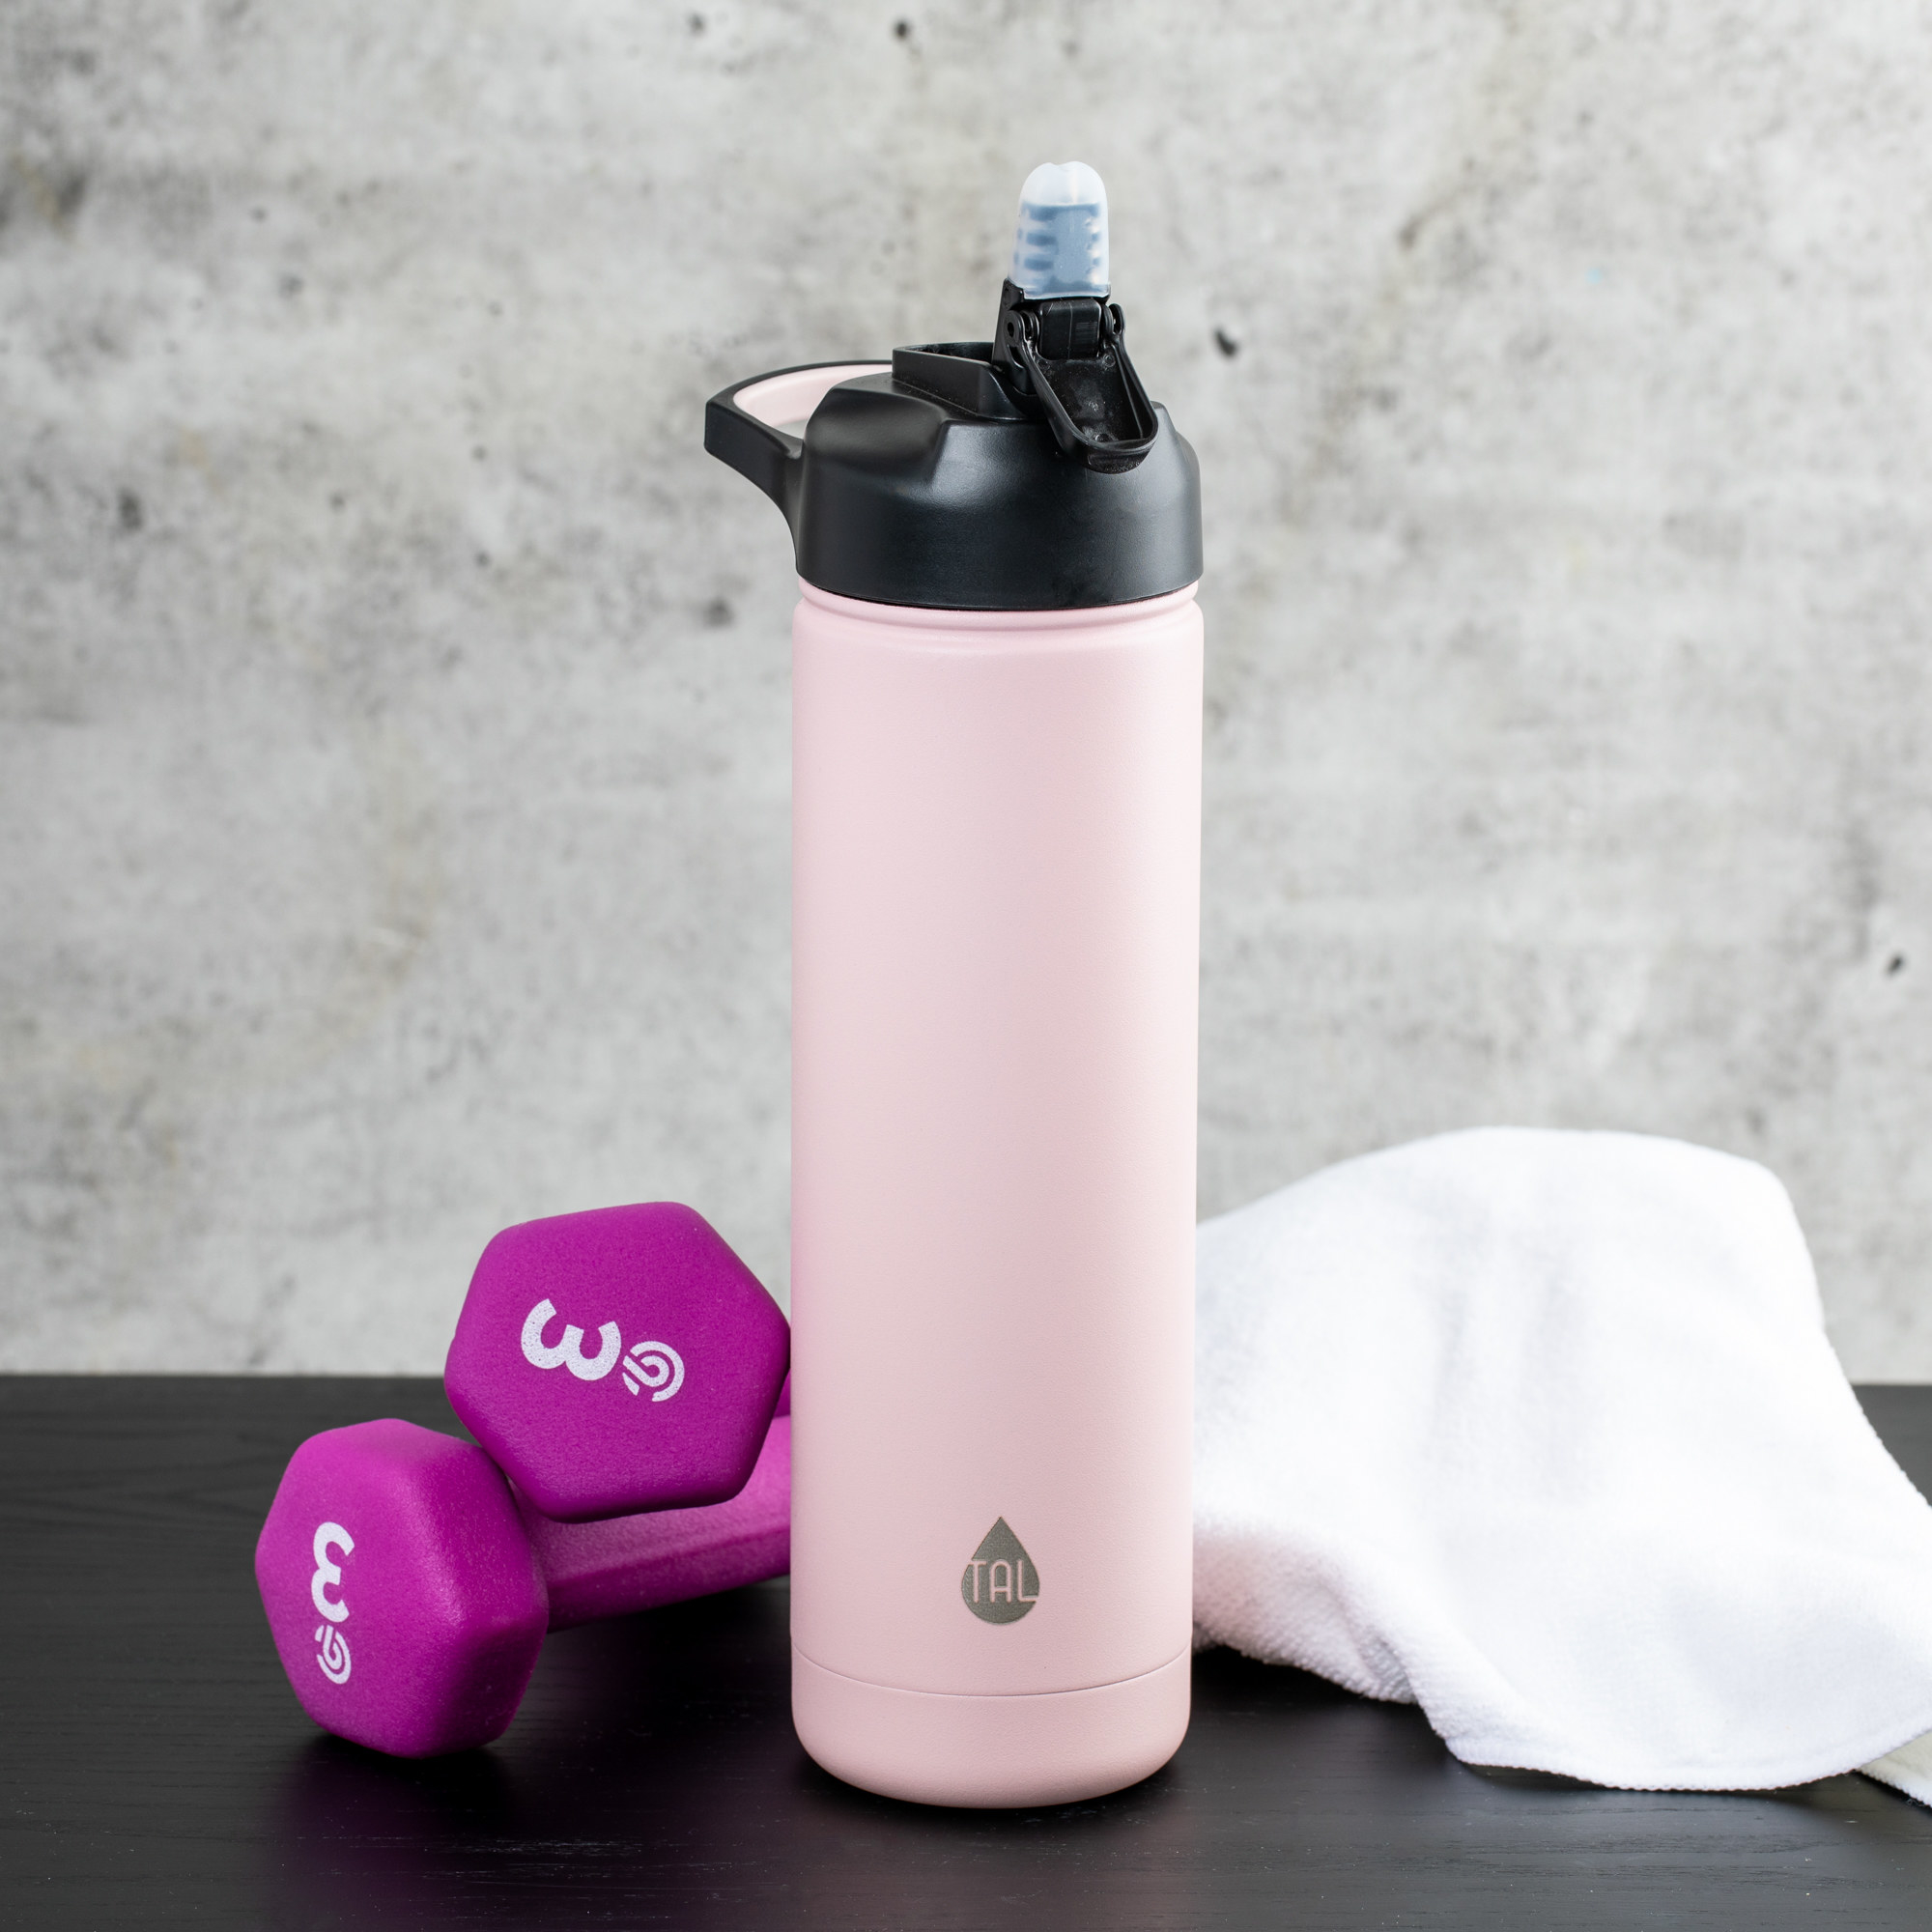 The pale pink reusable water bottle with small straw mouthpiece